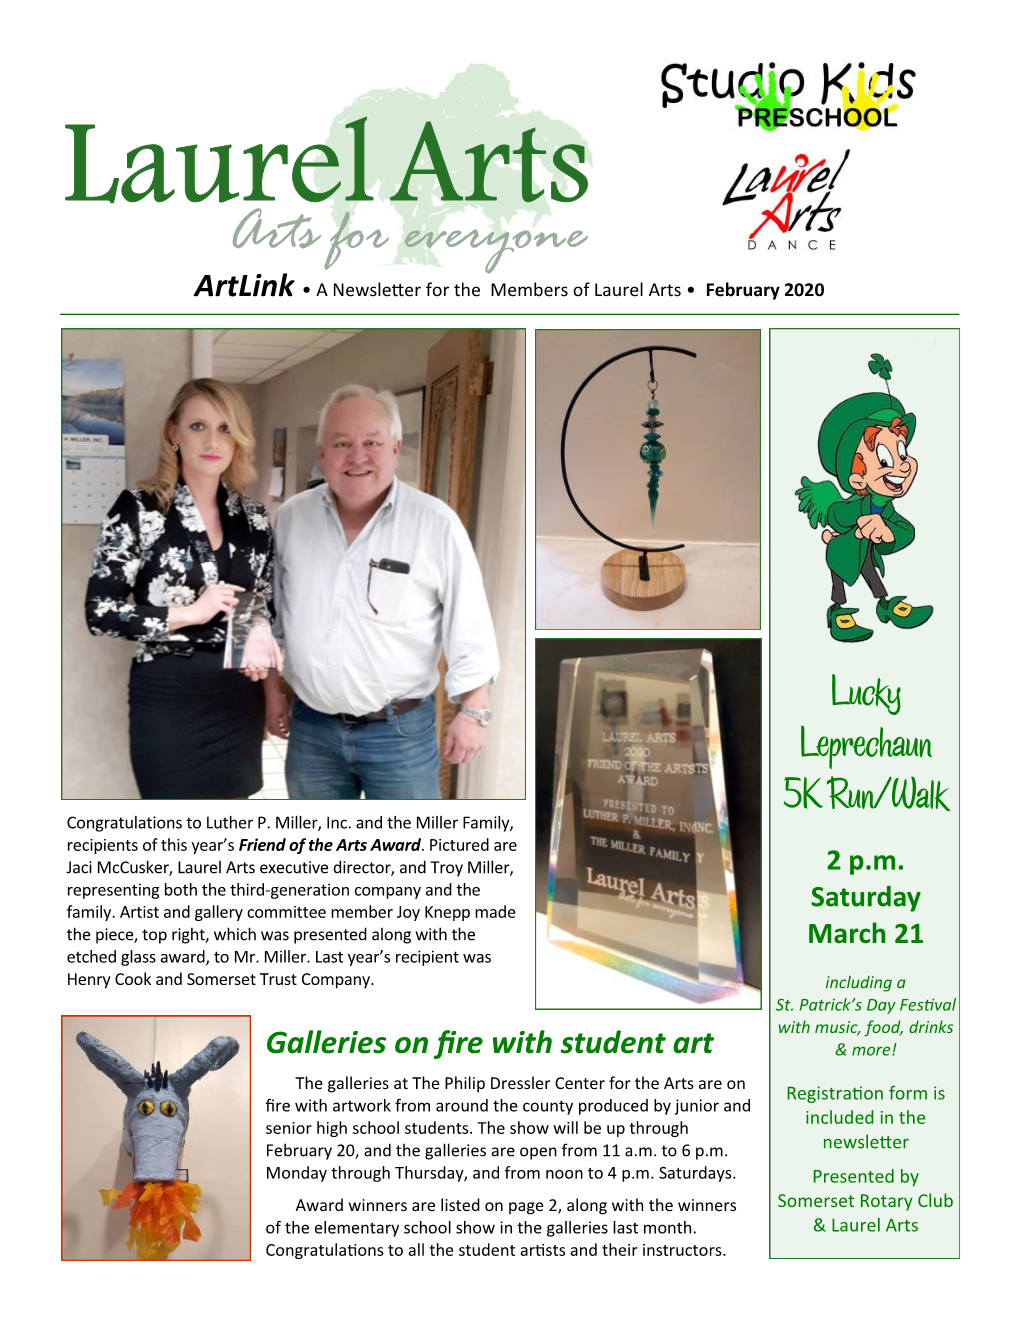 Arts for Everyone Artlink • a Newsletter for the Members of Laurel Arts • February 2020